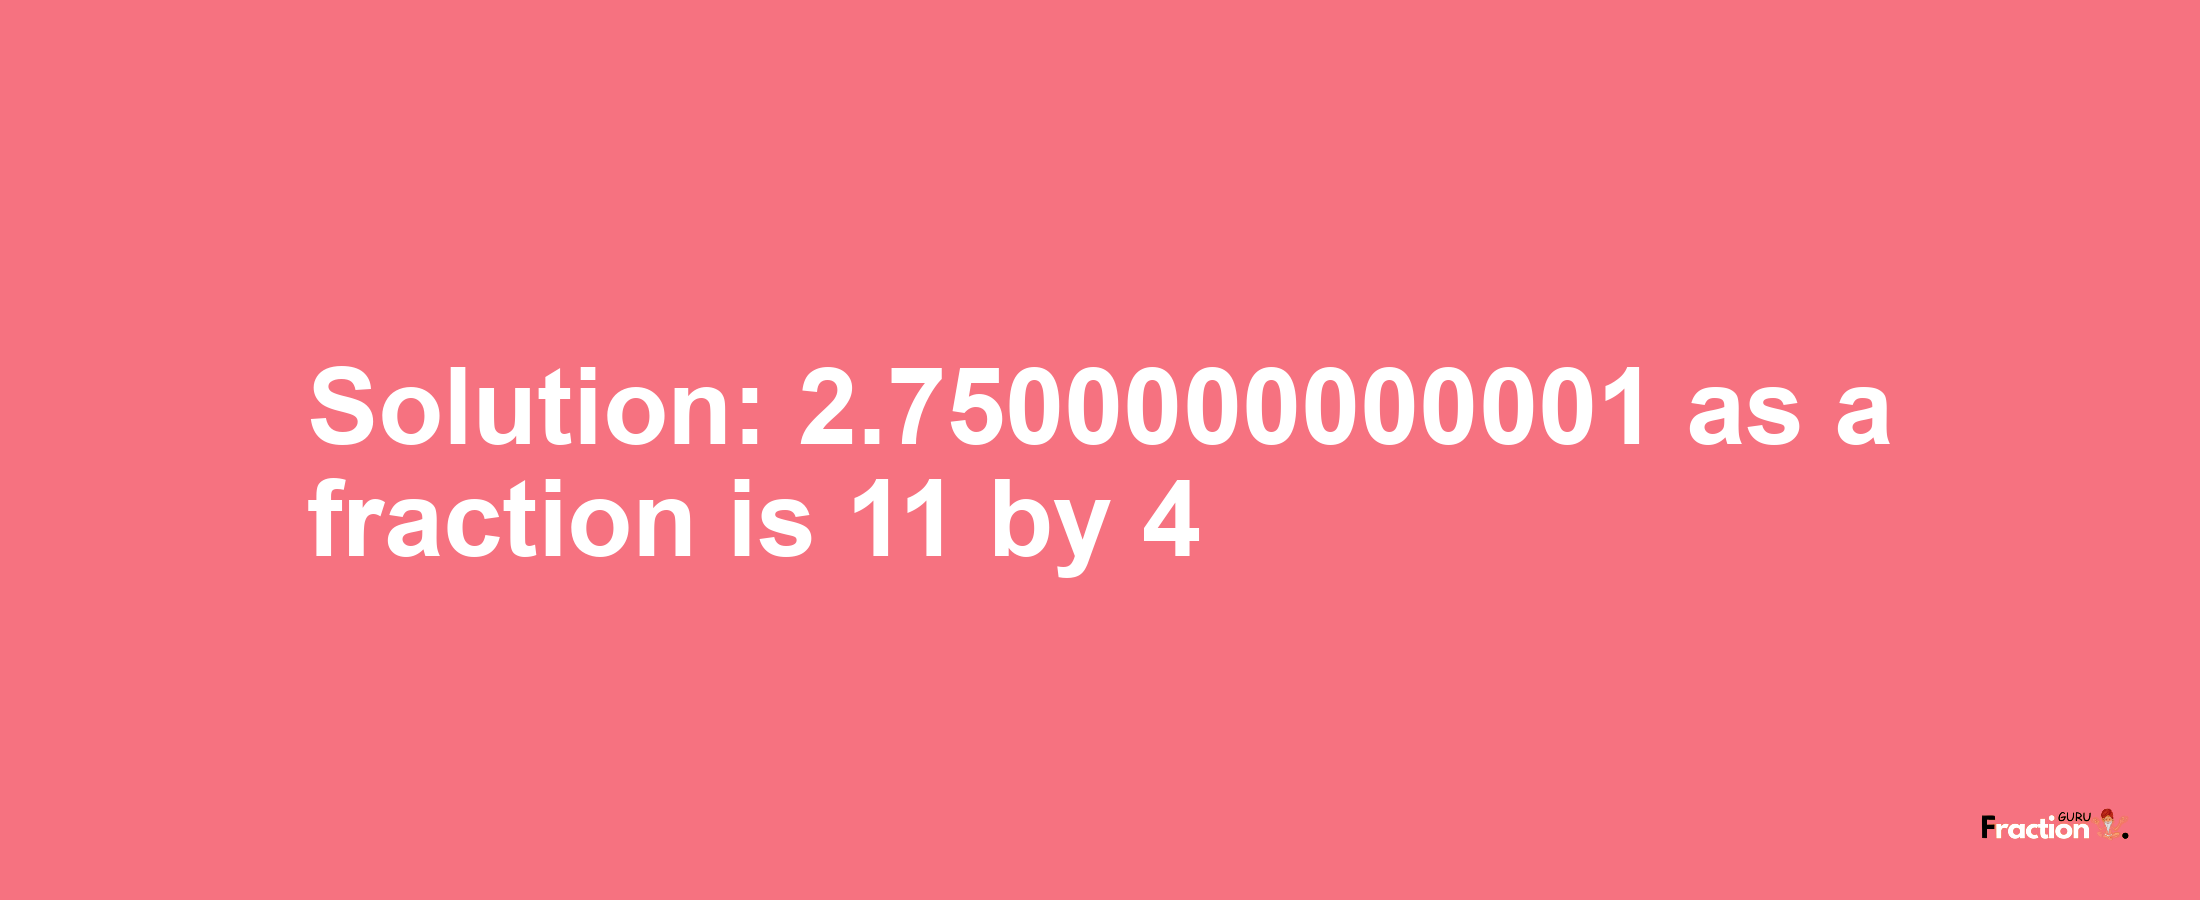 Solution:2.7500000000001 as a fraction is 11/4